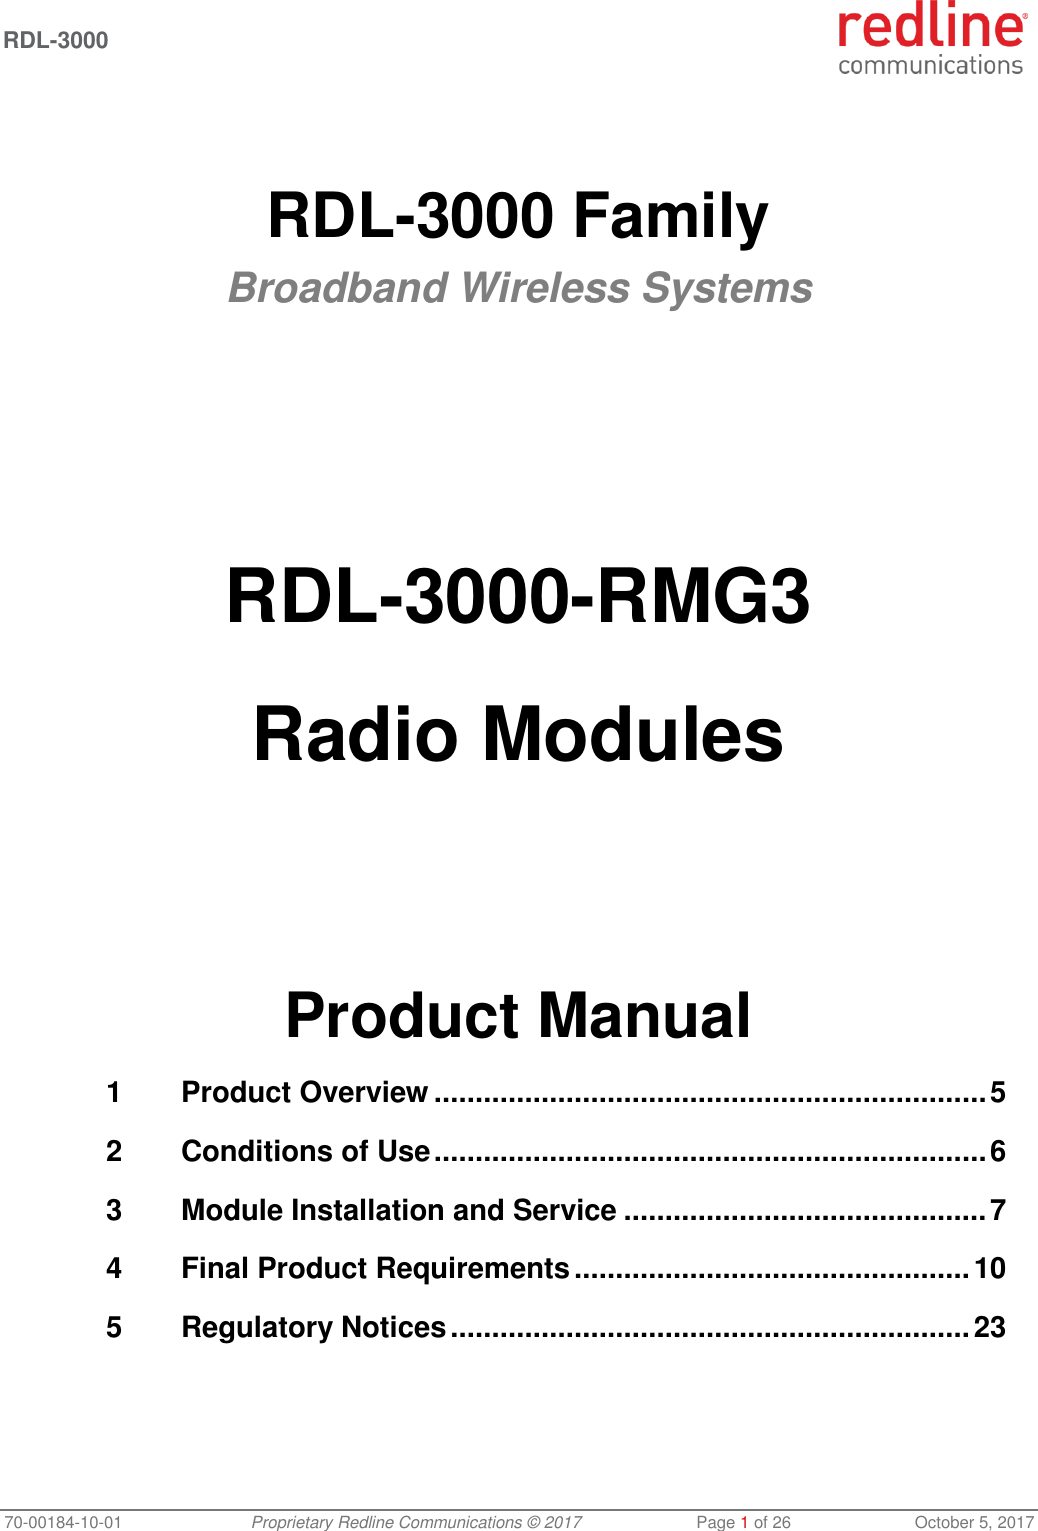  RDL-3000   70-00184-10-01 Proprietary Redline Communications © 2017  Page 1 of 26  October 5, 2017   RDL-3000 Family Broadband Wireless Systems        RDL-3000-RMG3  Radio Modules       Product Manual 1 Product Overview ................................................................... 5 2 Conditions of Use ................................................................... 6 3 Module Installation and Service ............................................ 7 4 Final Product Requirements ................................................ 10 5 Regulatory Notices ............................................................... 23 